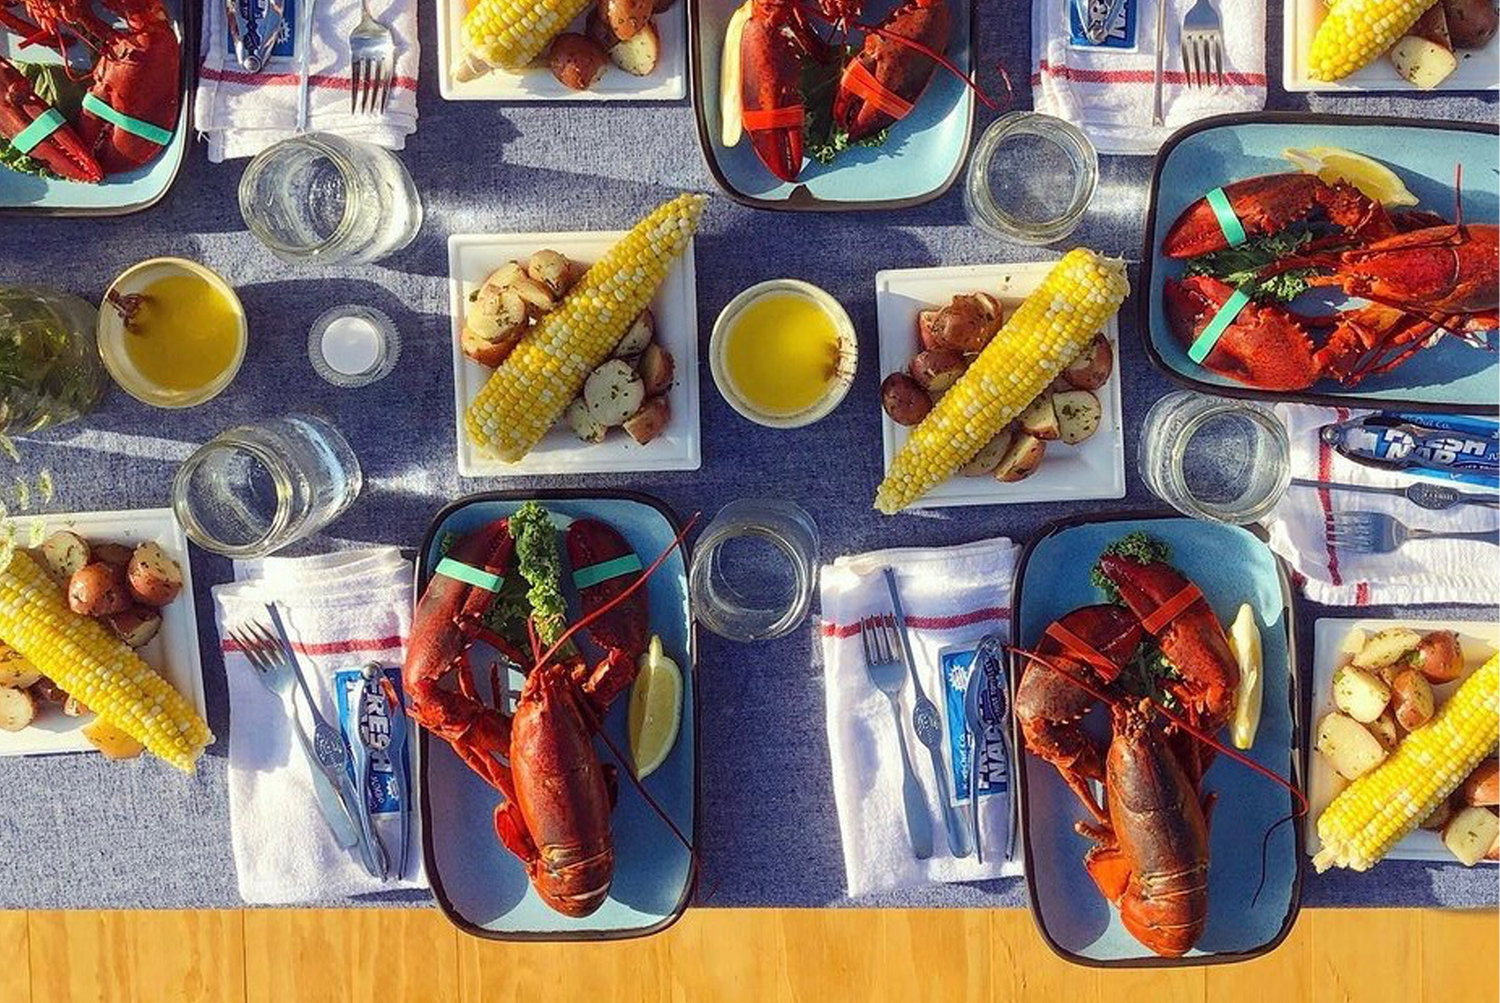 A Howarth Family Lobster Bake is an essential Block Island dining experience, and it comes to your home or rental